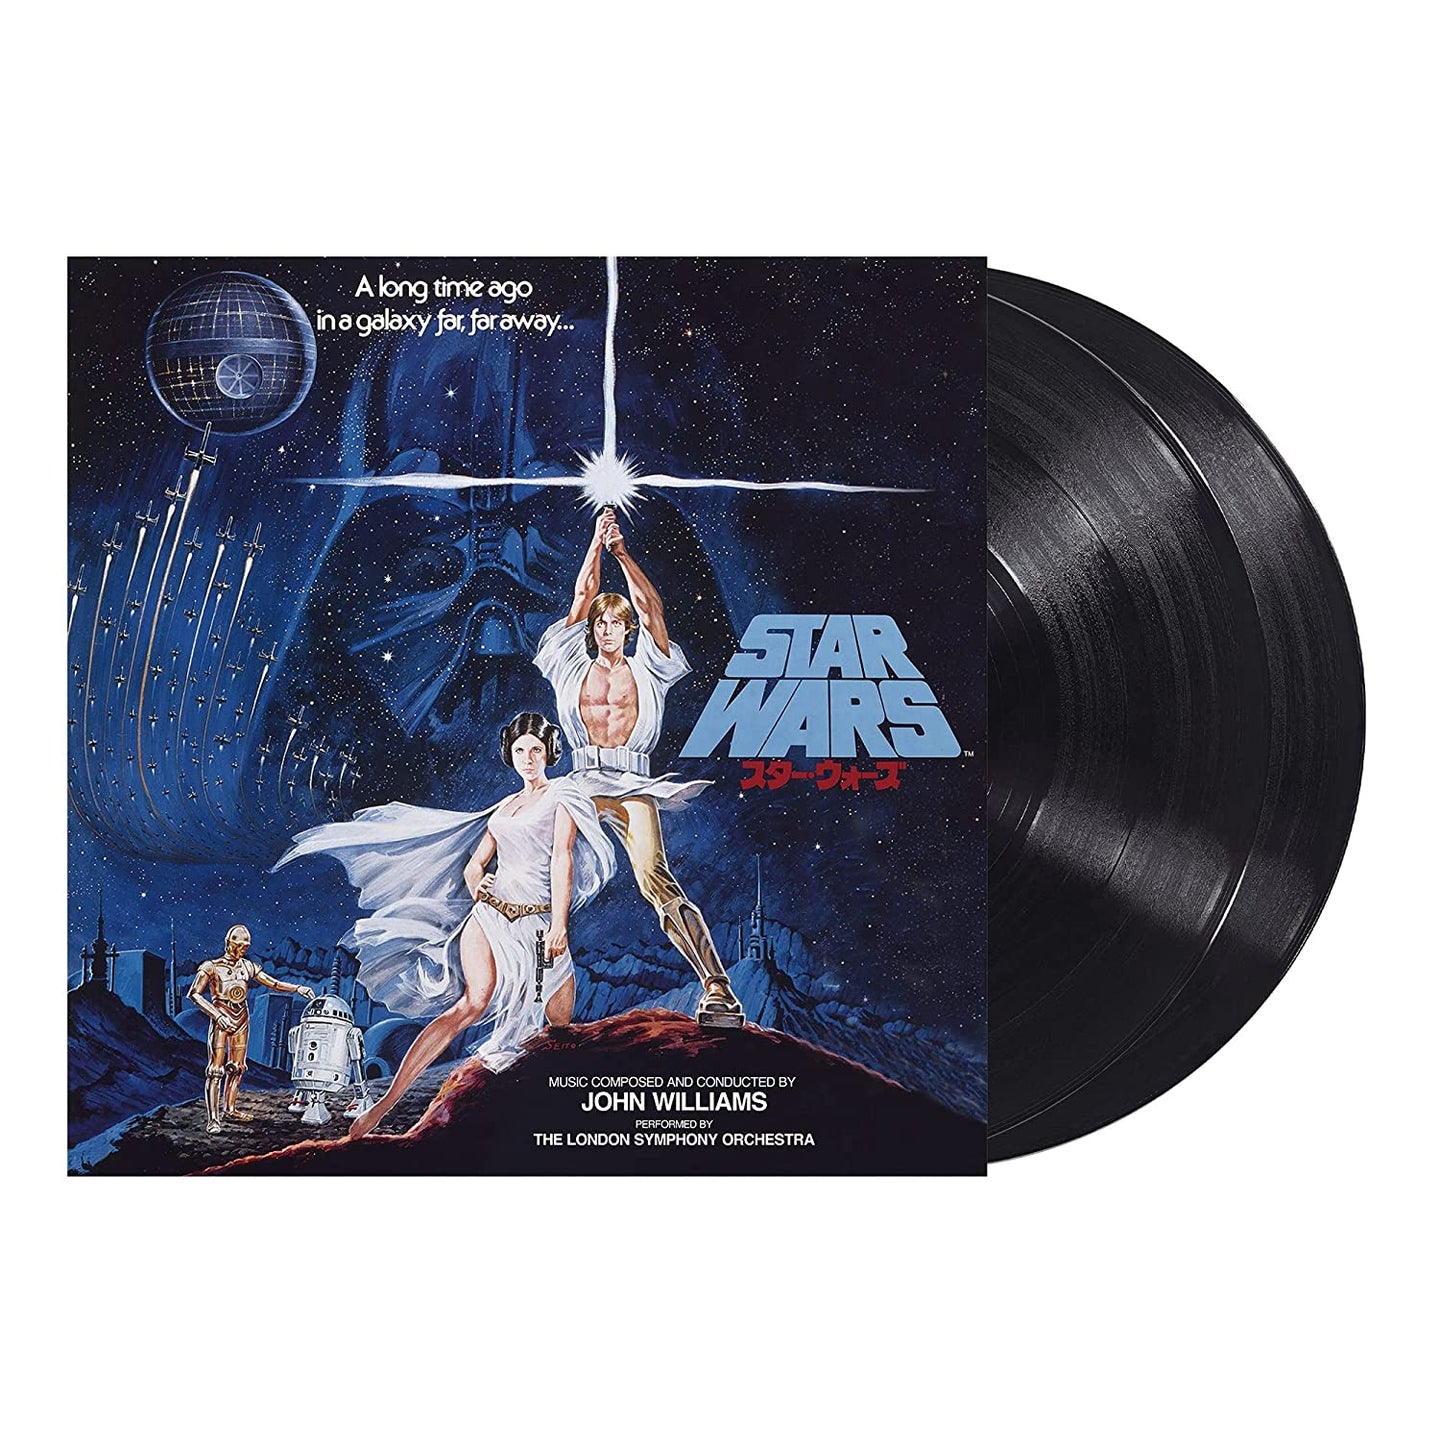 Star Wars: A New Hope - Original Motion Picture Soundtrack